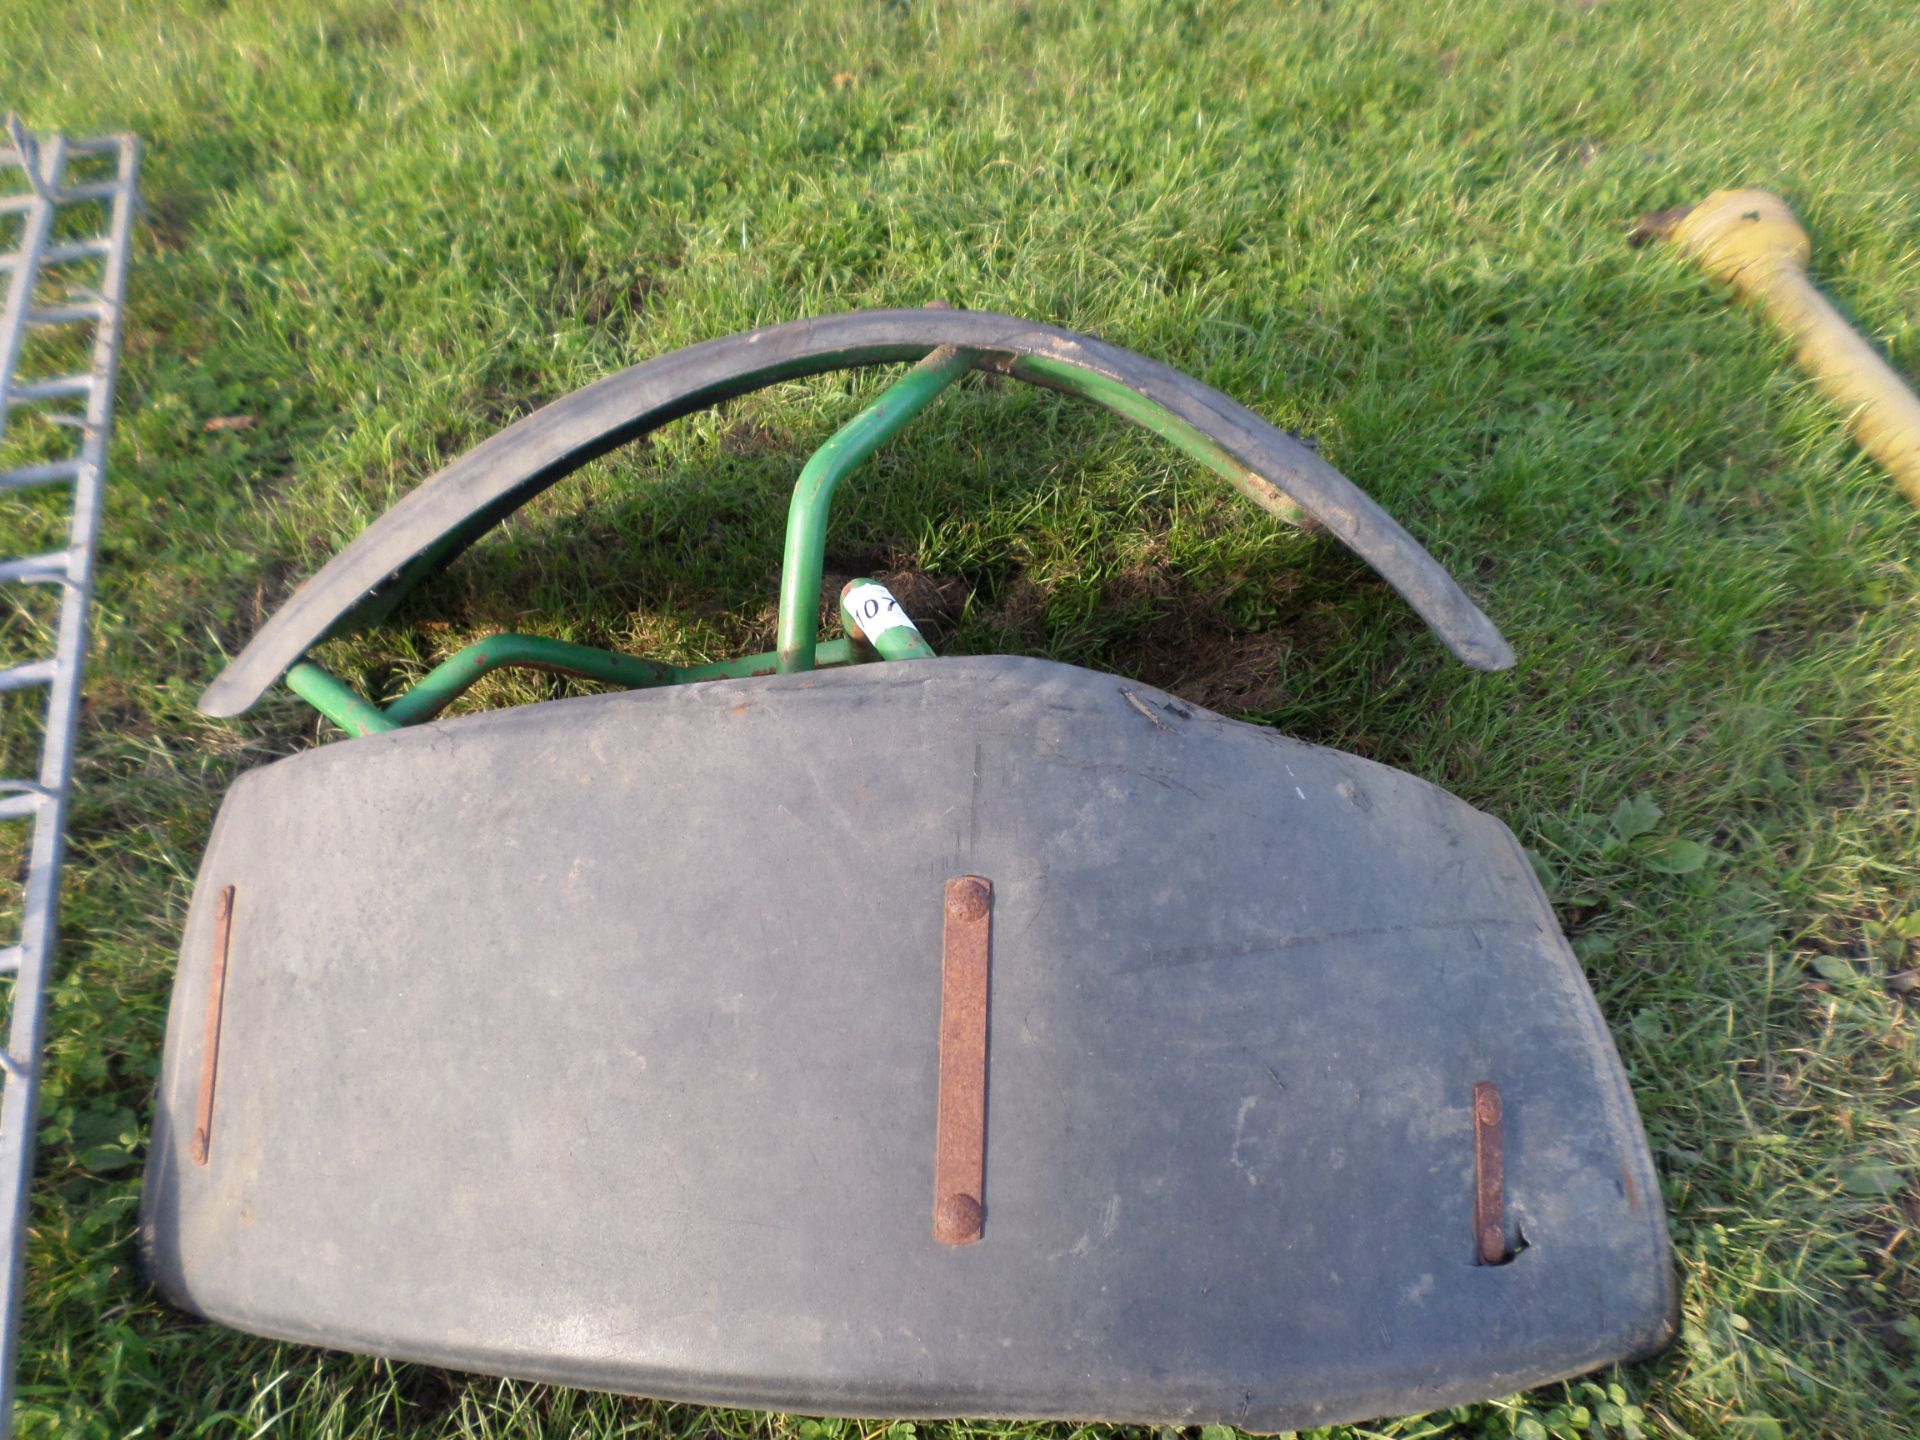 2 mudguards to fit front end of John Deere 3050